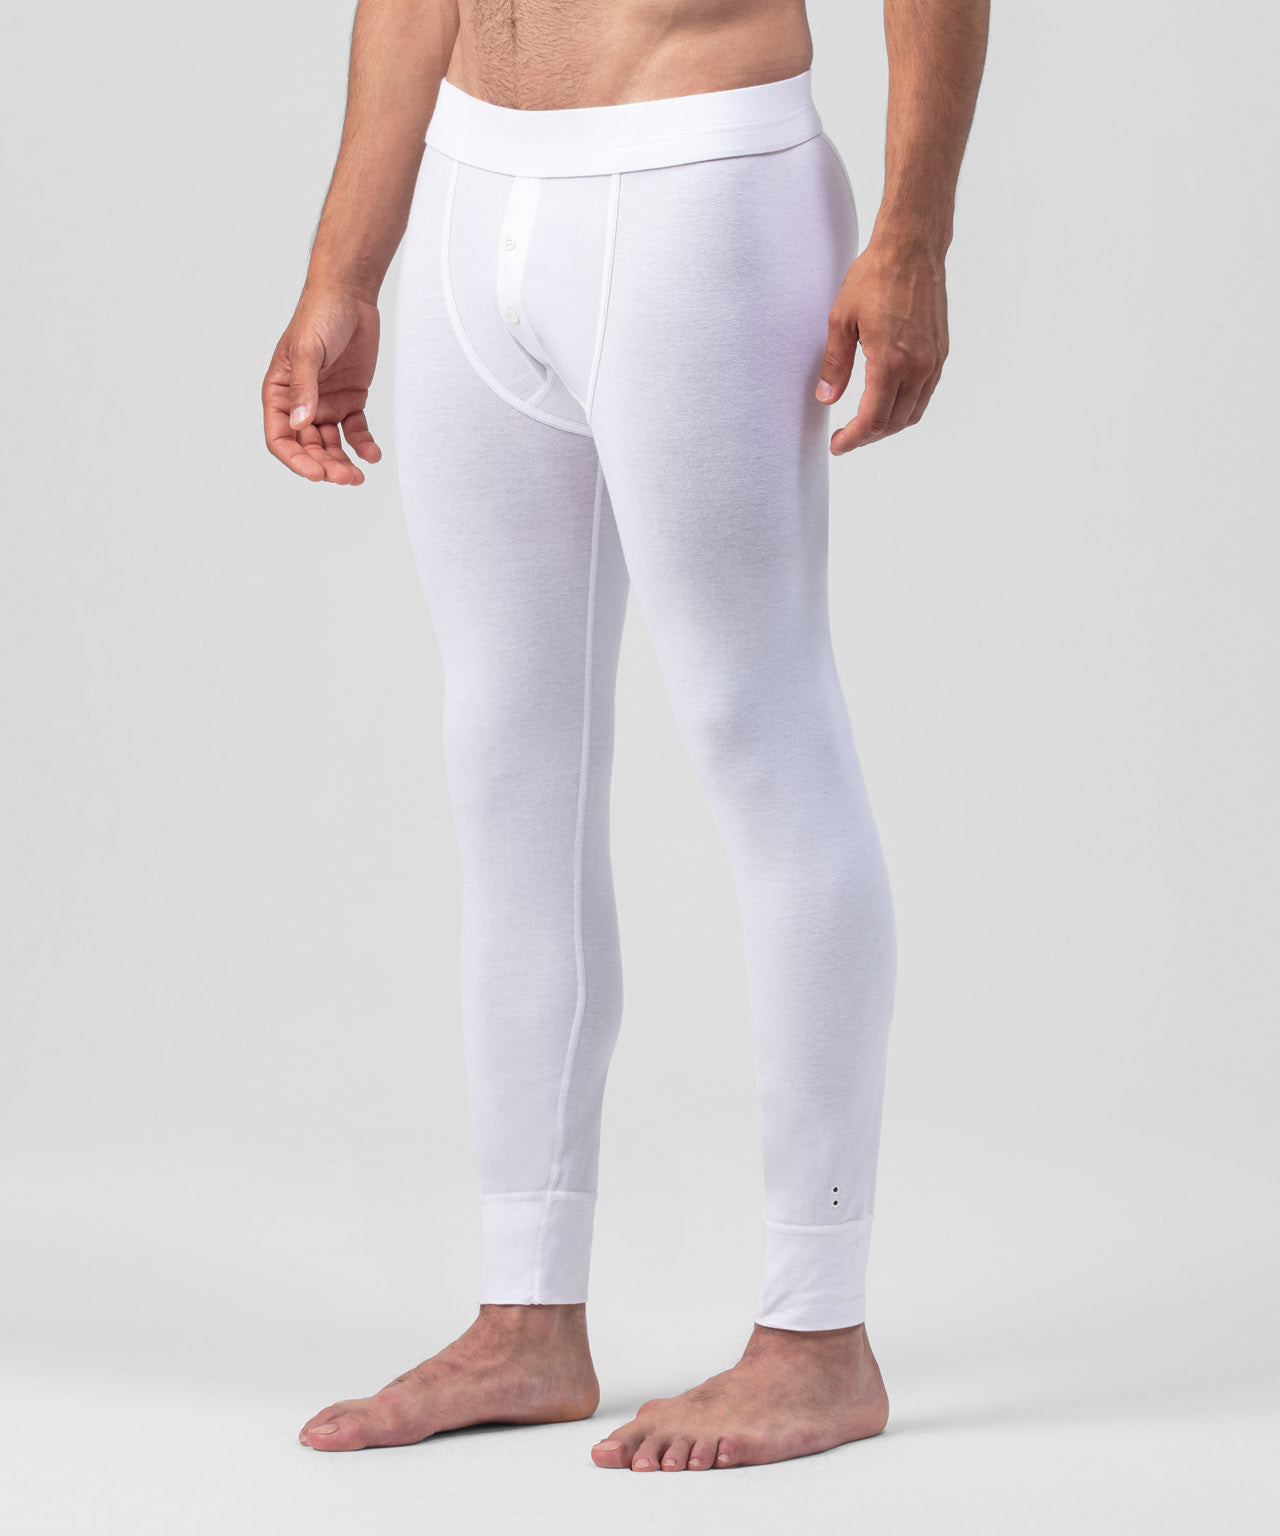 Traditional Long Johns Thermal Underwear For Men - white 